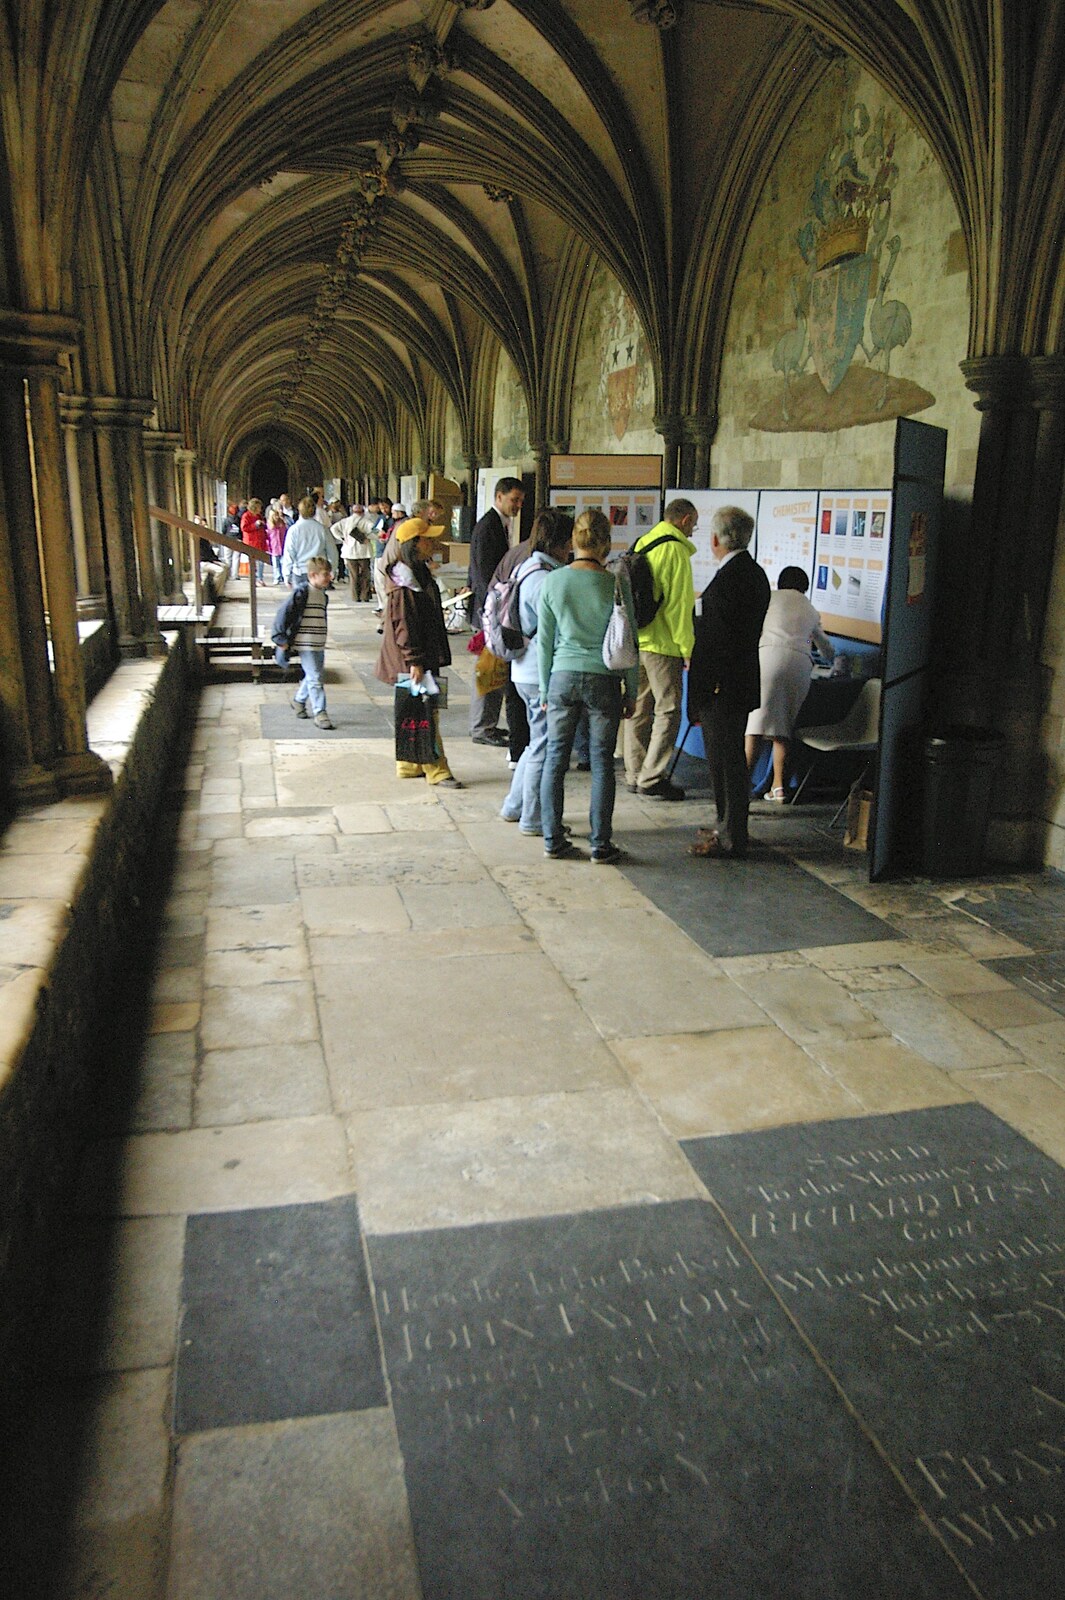 In the cloisters of Norwich cathedral from Spiders, Norwich Science Festival and Kingston Arms Music - 5th September 2006